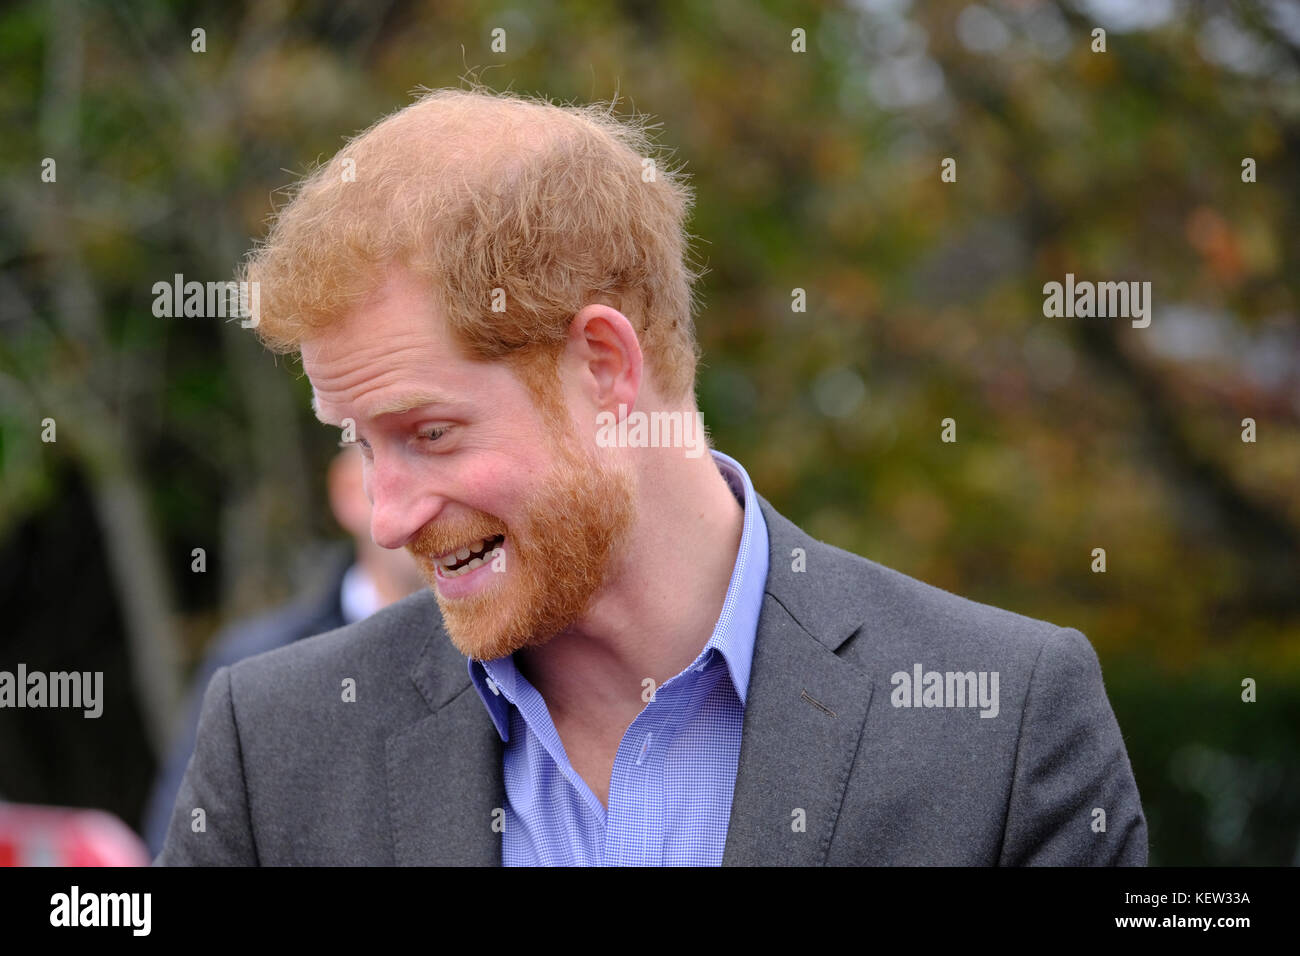 St Michael's on Wyre, UK. 23rd Oct, 2017. Prince Harry returned to St Michael's on Wyre, in follow up to his visit to the flood affected village in February 2016. Around 1700 businesses and homes were damaged across the Lancashire district in the lead up to New Year in 2016. Credit: Paul Melling/Alamy Live News Stock Photo